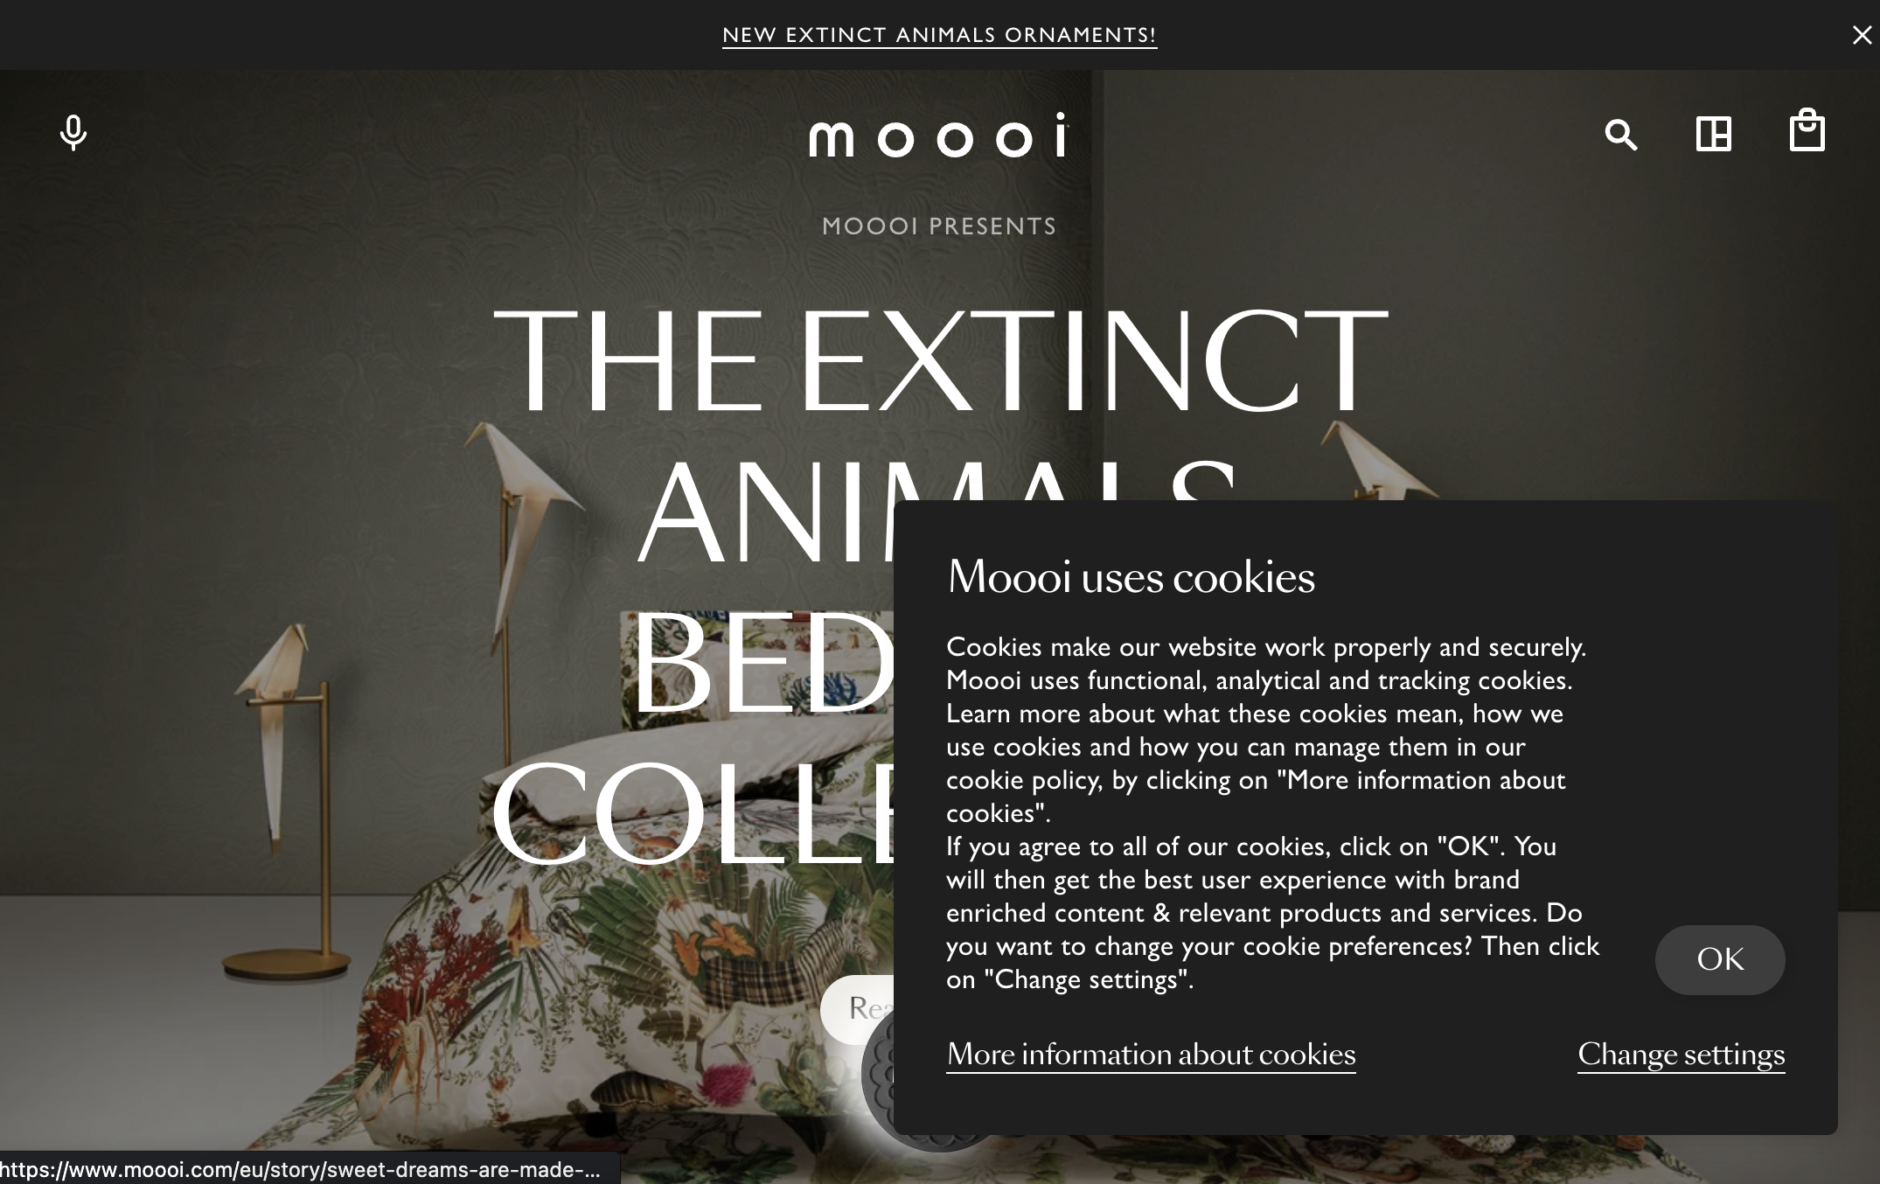 Moooi's cookie collection module